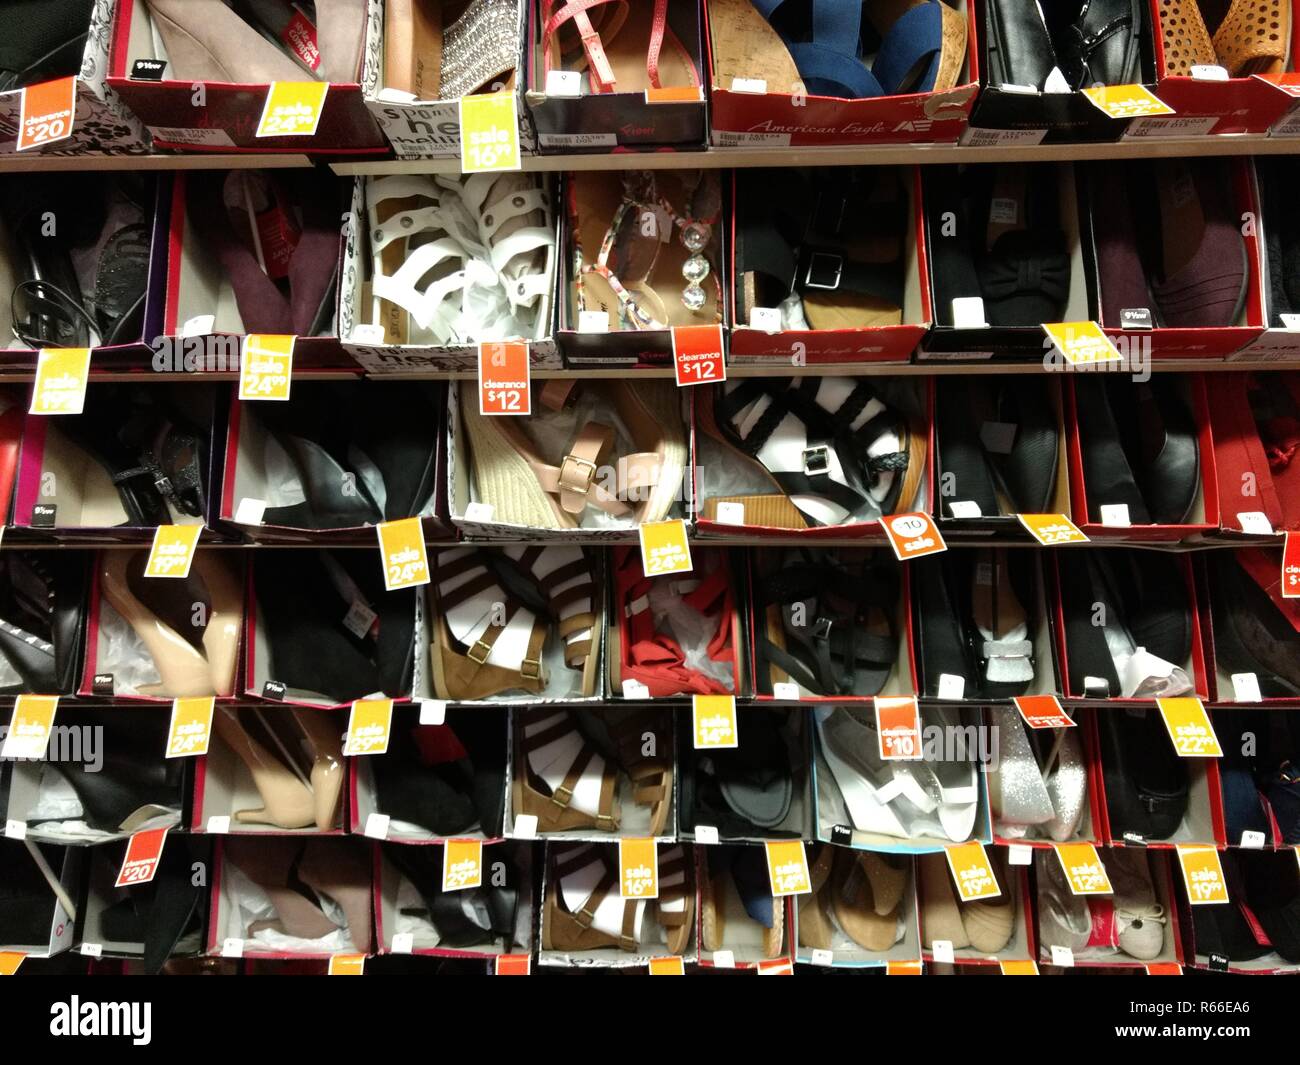 Shoes on sale in Payless ShoeSource Stock Photo